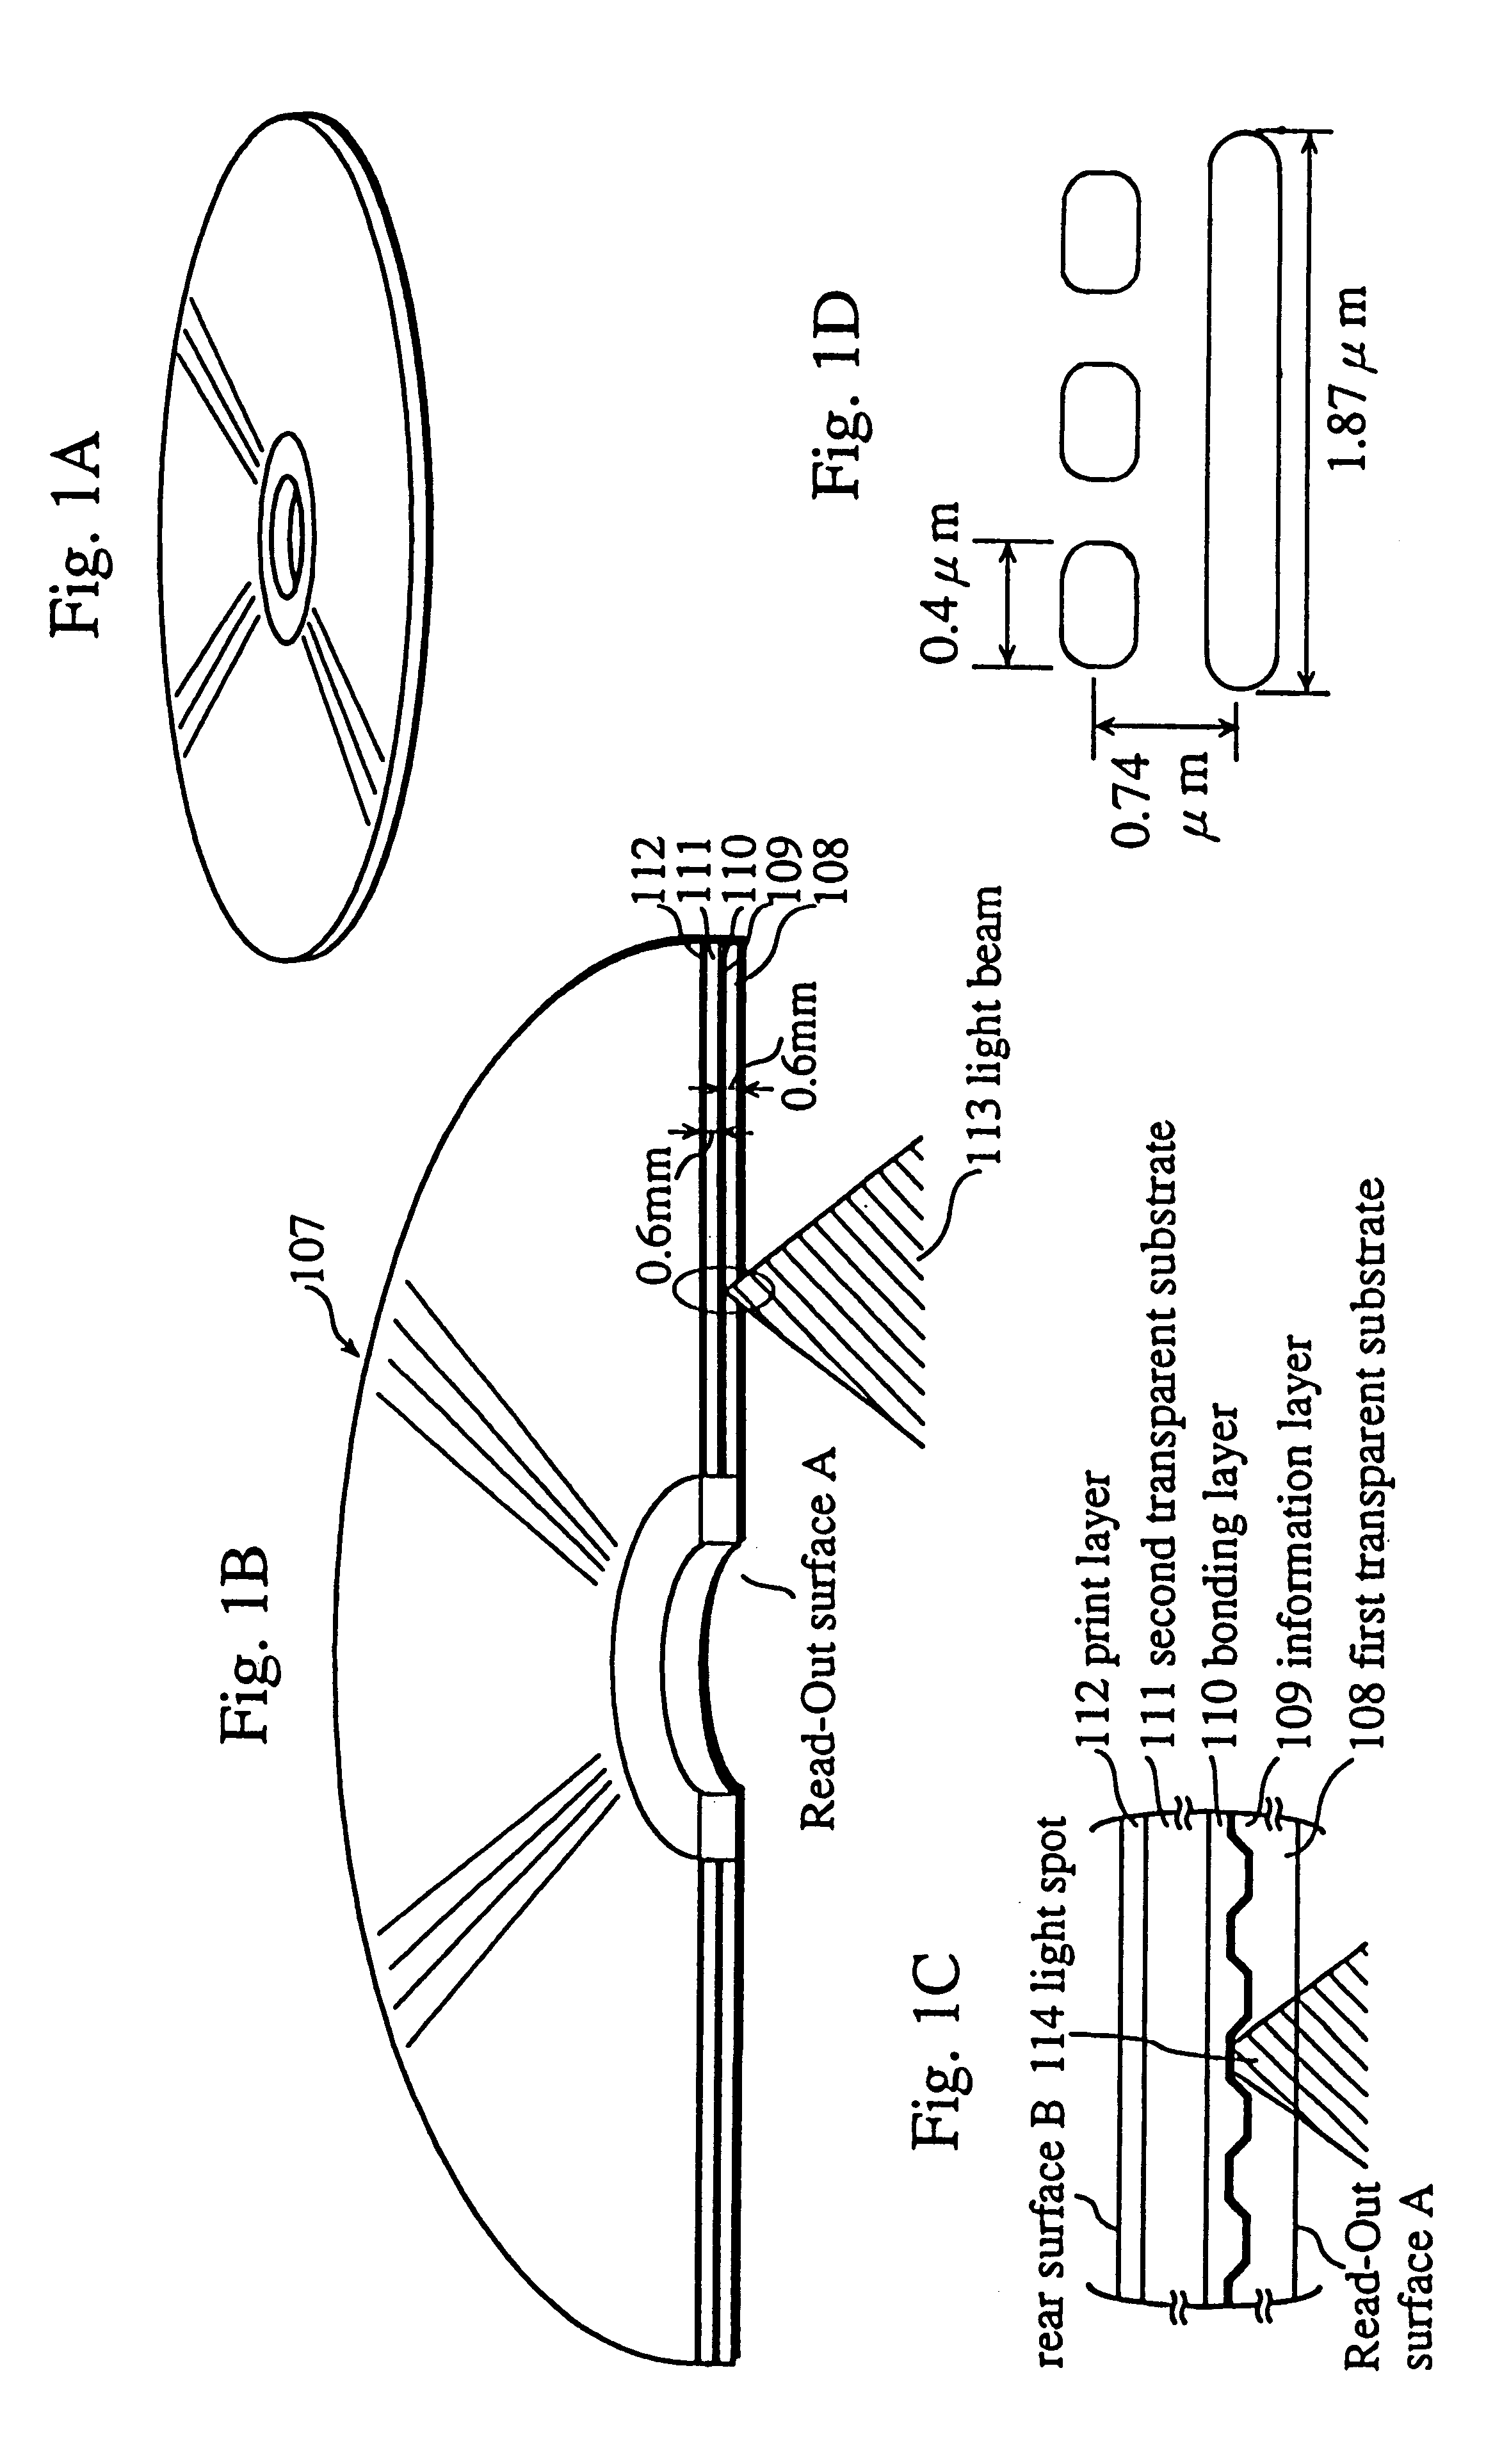 Optical disc, reproduction device and method for coordinating a variable reproduction of video images